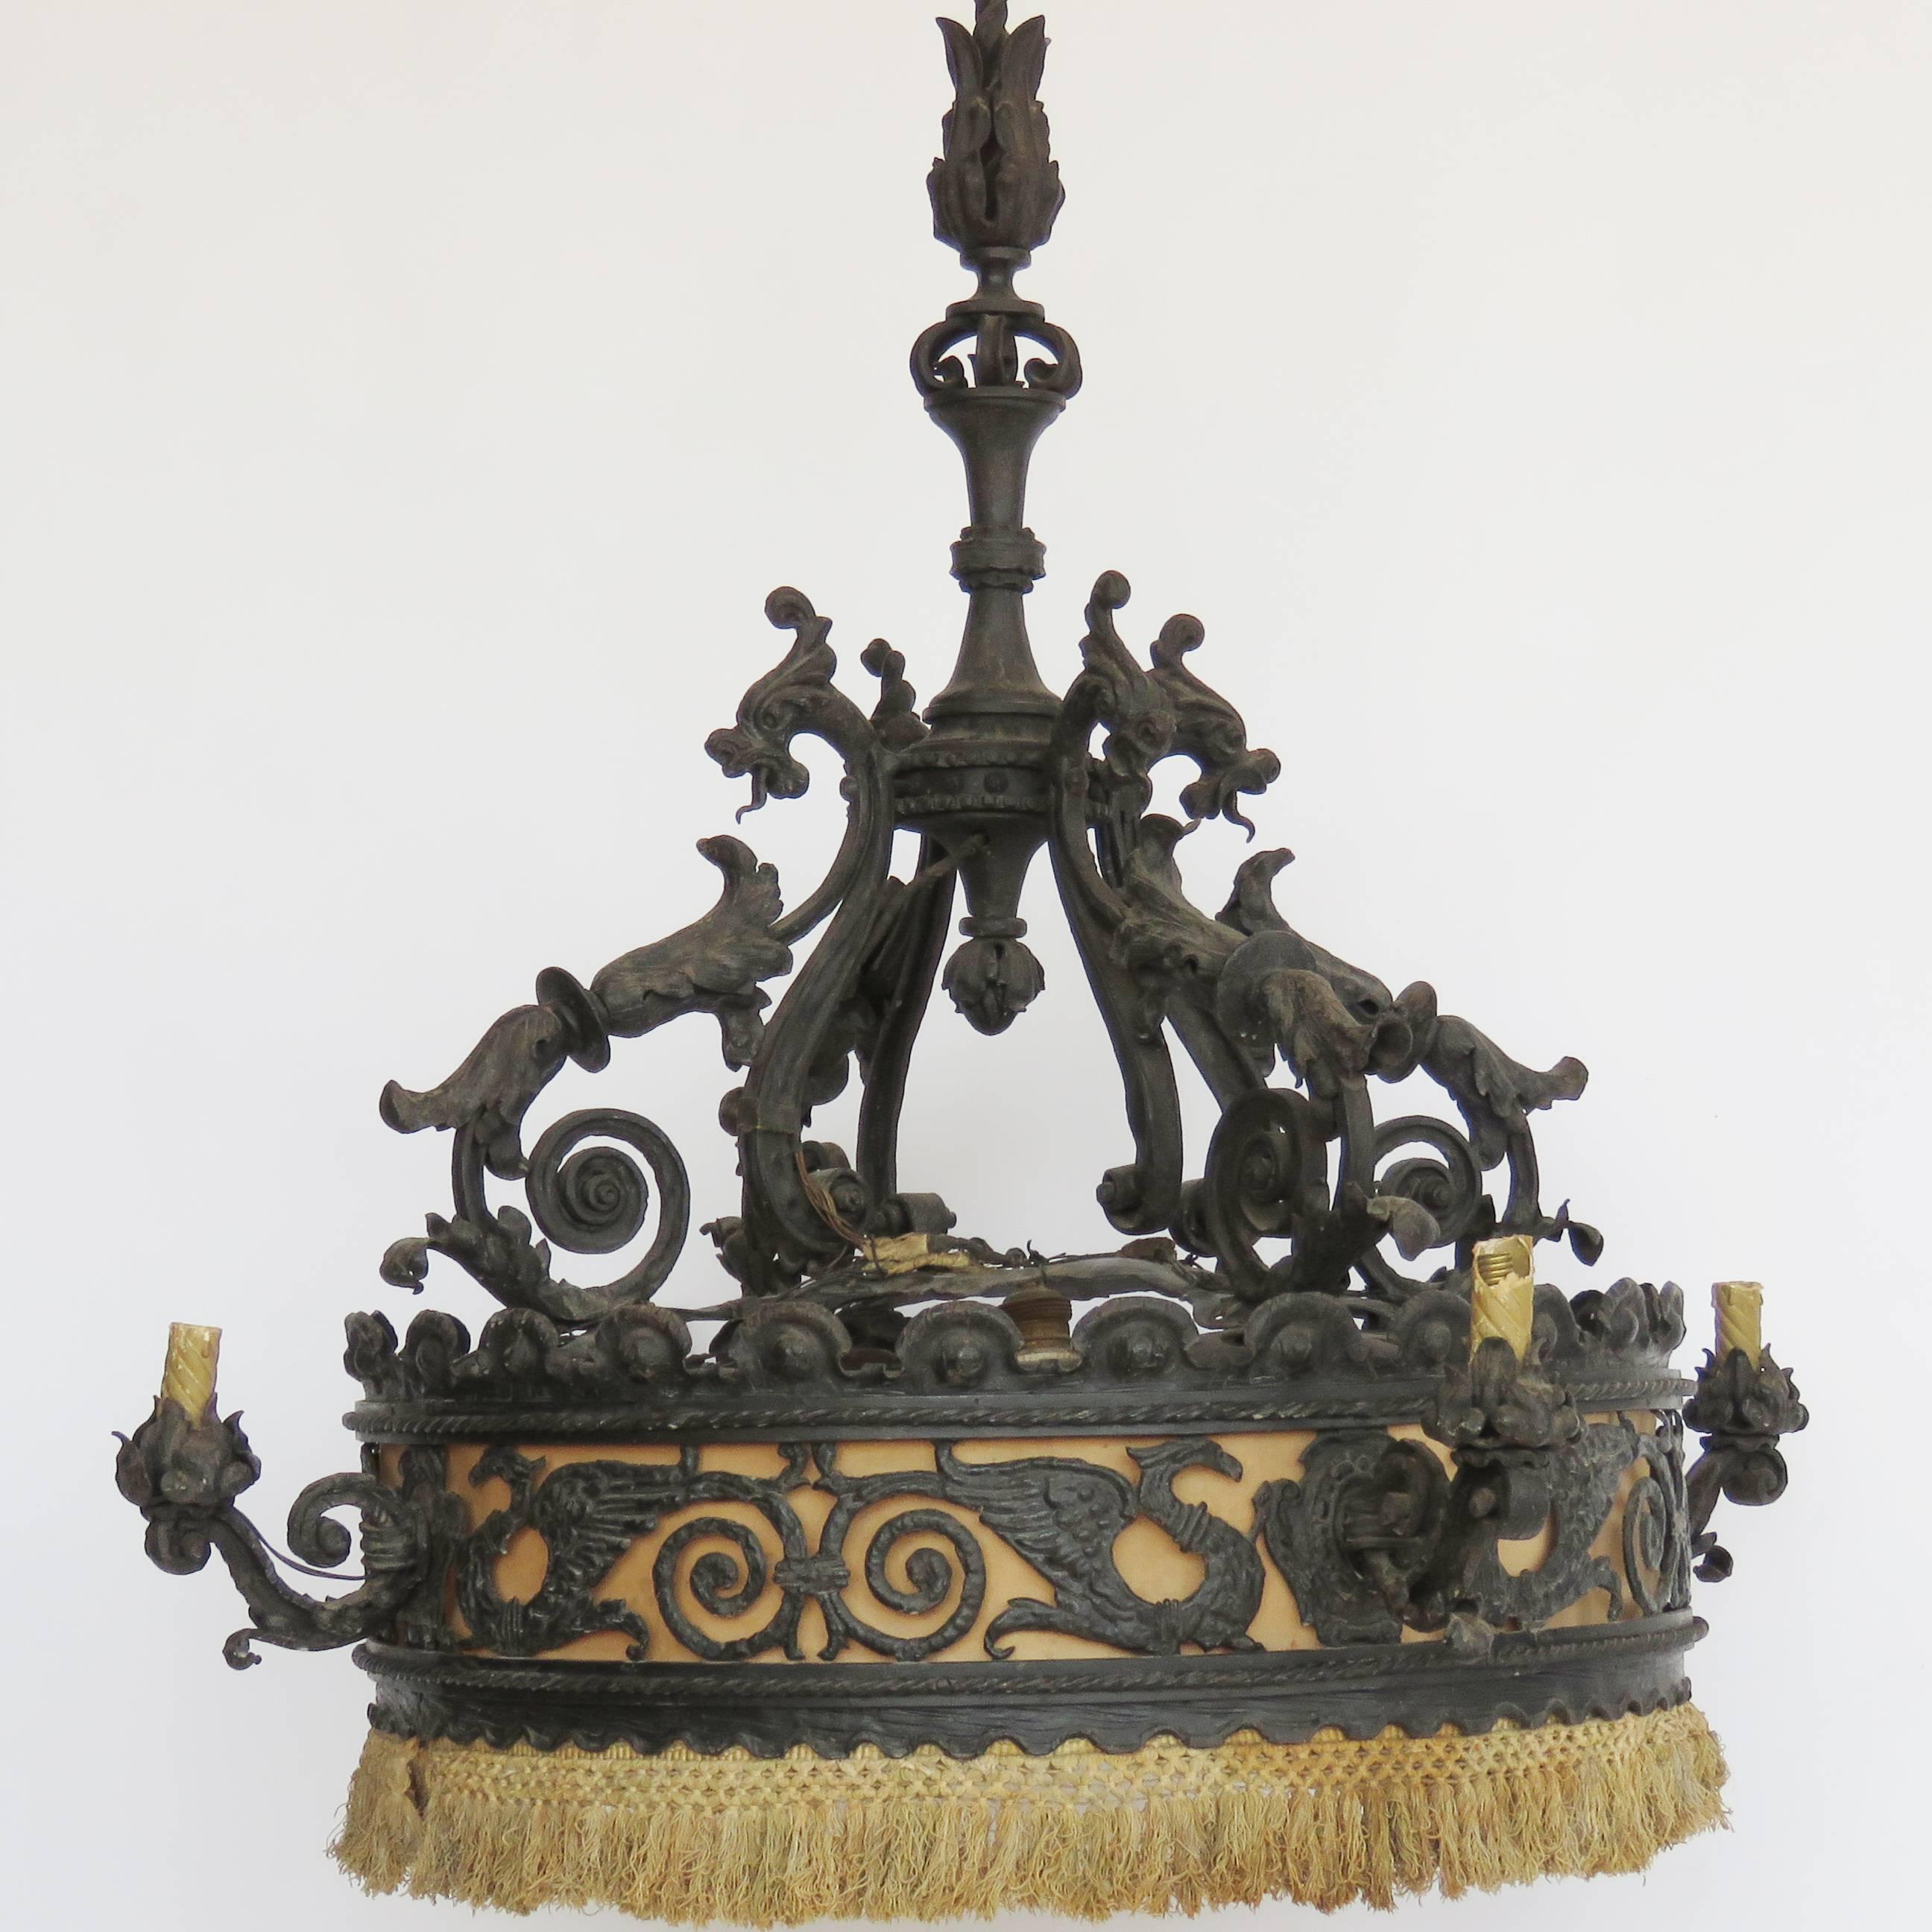 Hammered iron chandelier of Gothic influence. Lined with lighter colored fabric to show off the intricate detail of the ironwork with scrolls, griffens and dragons. Four outer lights, five inner lights.

Provenance: Barcelona, Spain.

Chandelier